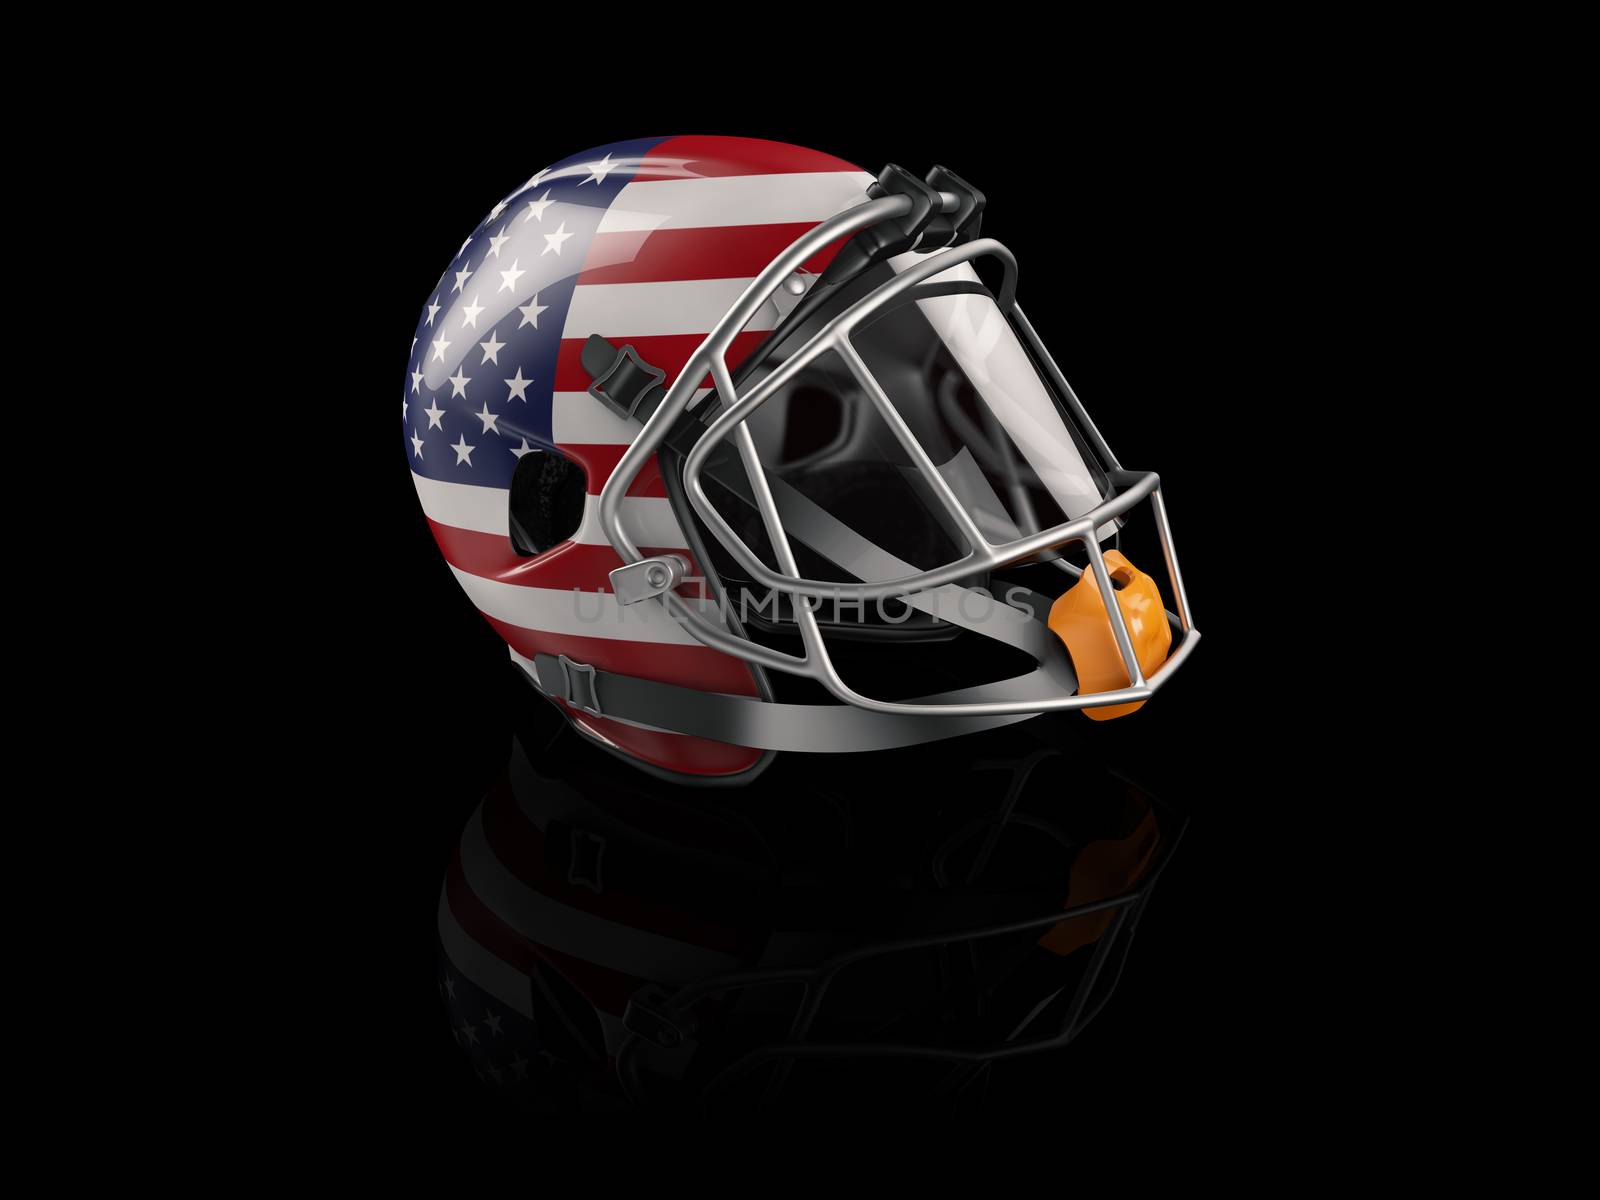 3d Rendering of Rugby helmet with USA flag for web and mobile design by tussik